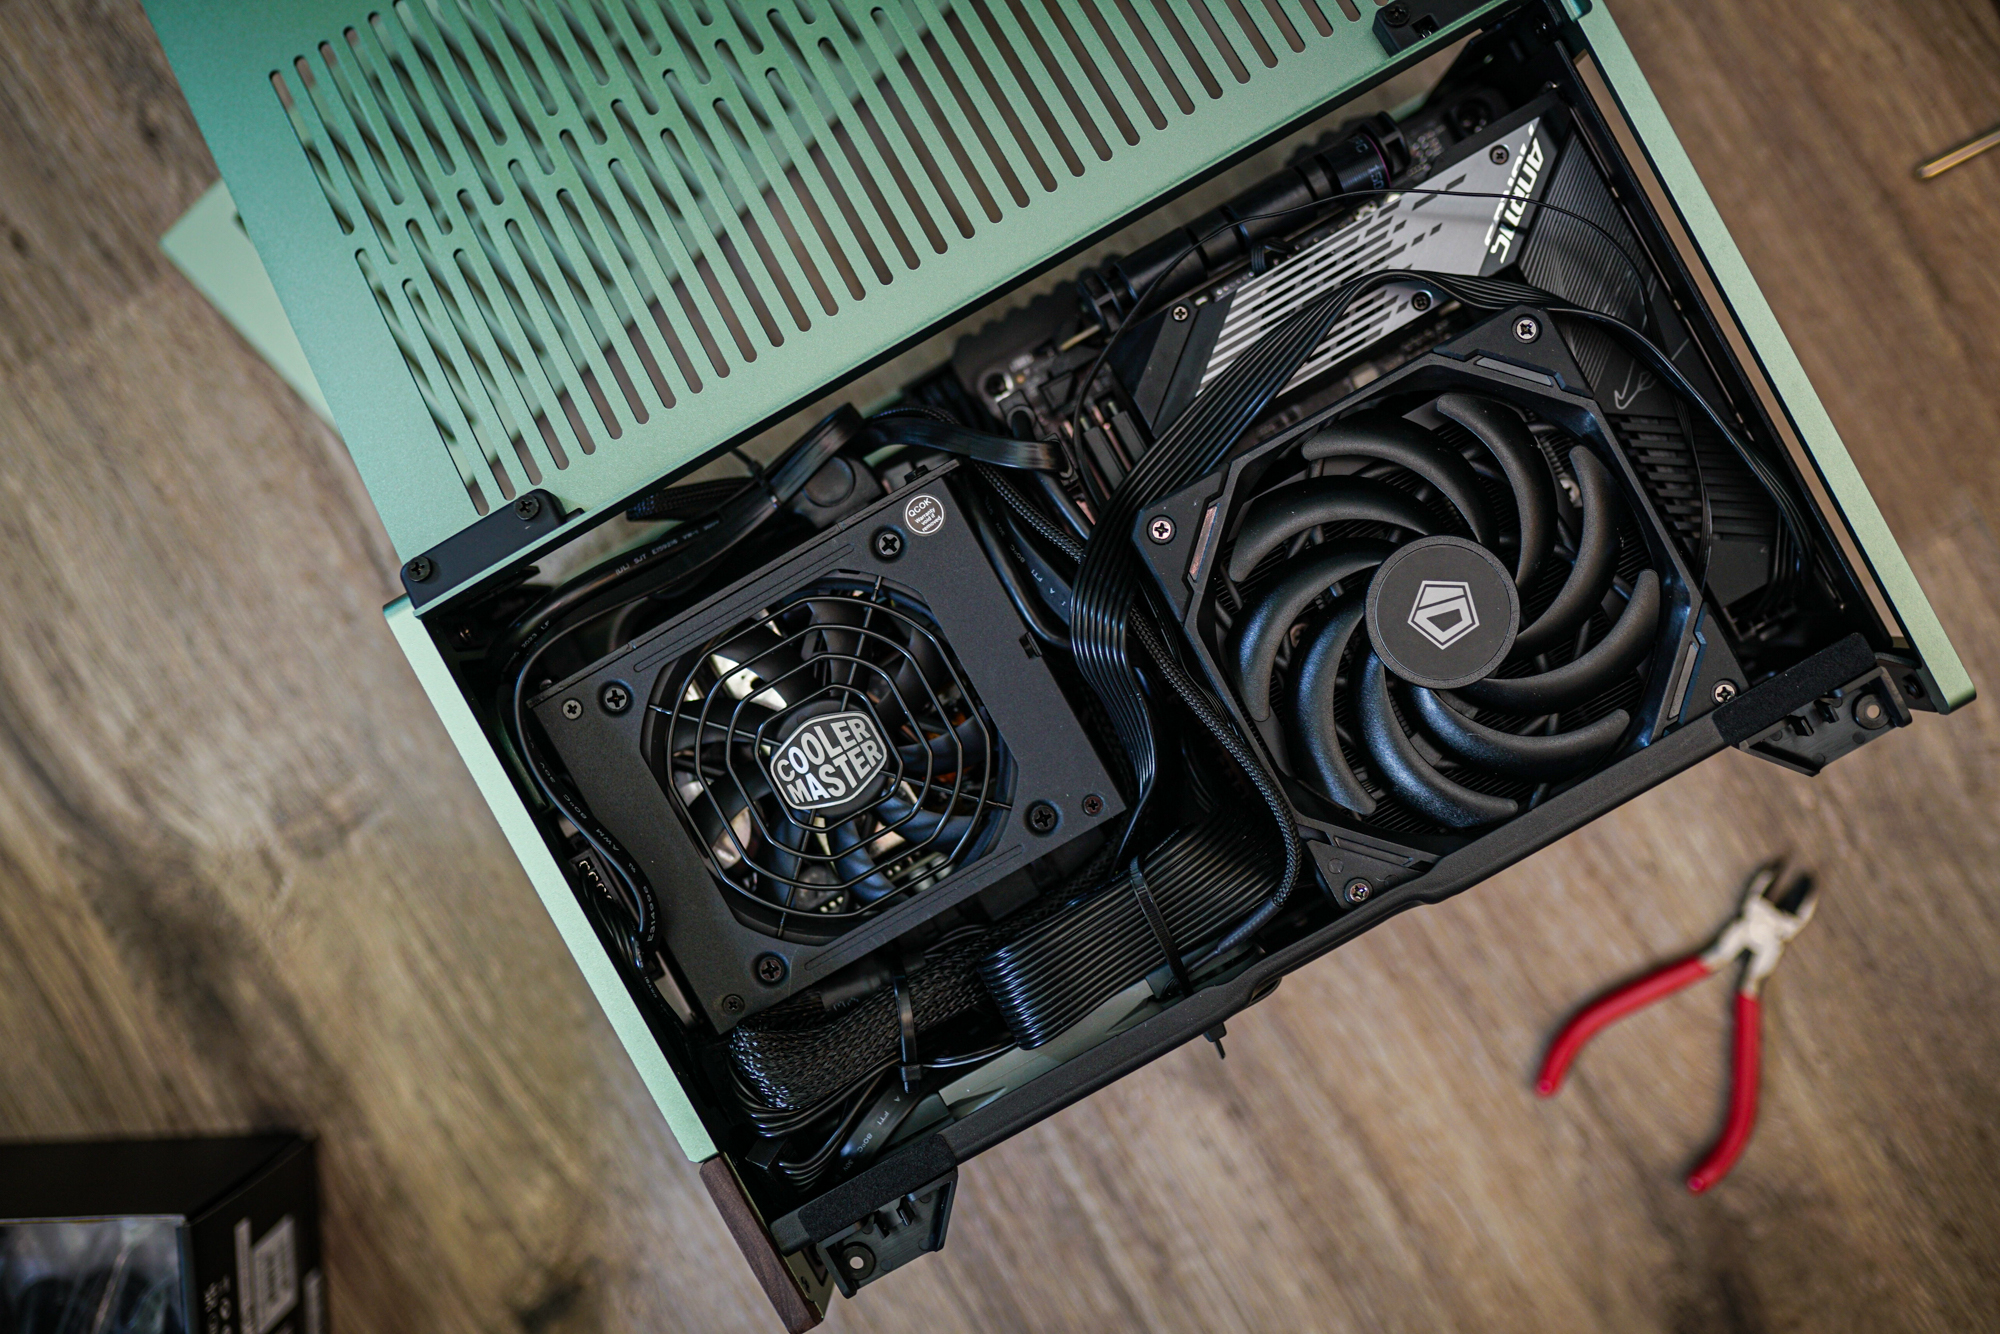 A small form factor build inside the Fractal Terra.